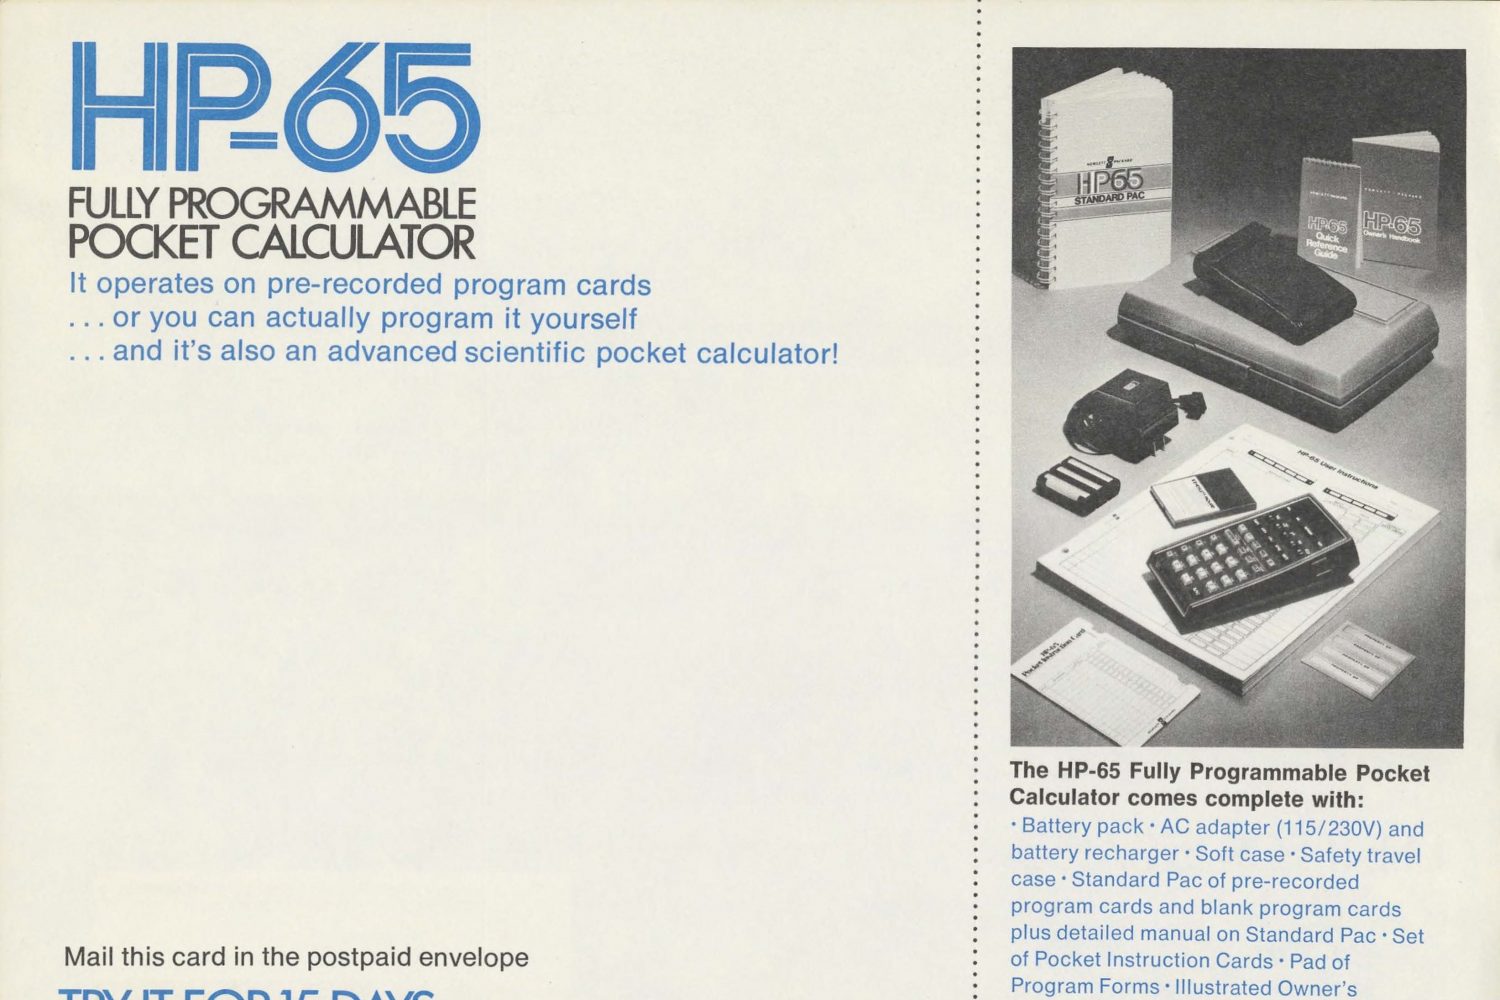 A print ad for the HP-65, a fully programmable pocket calculator.